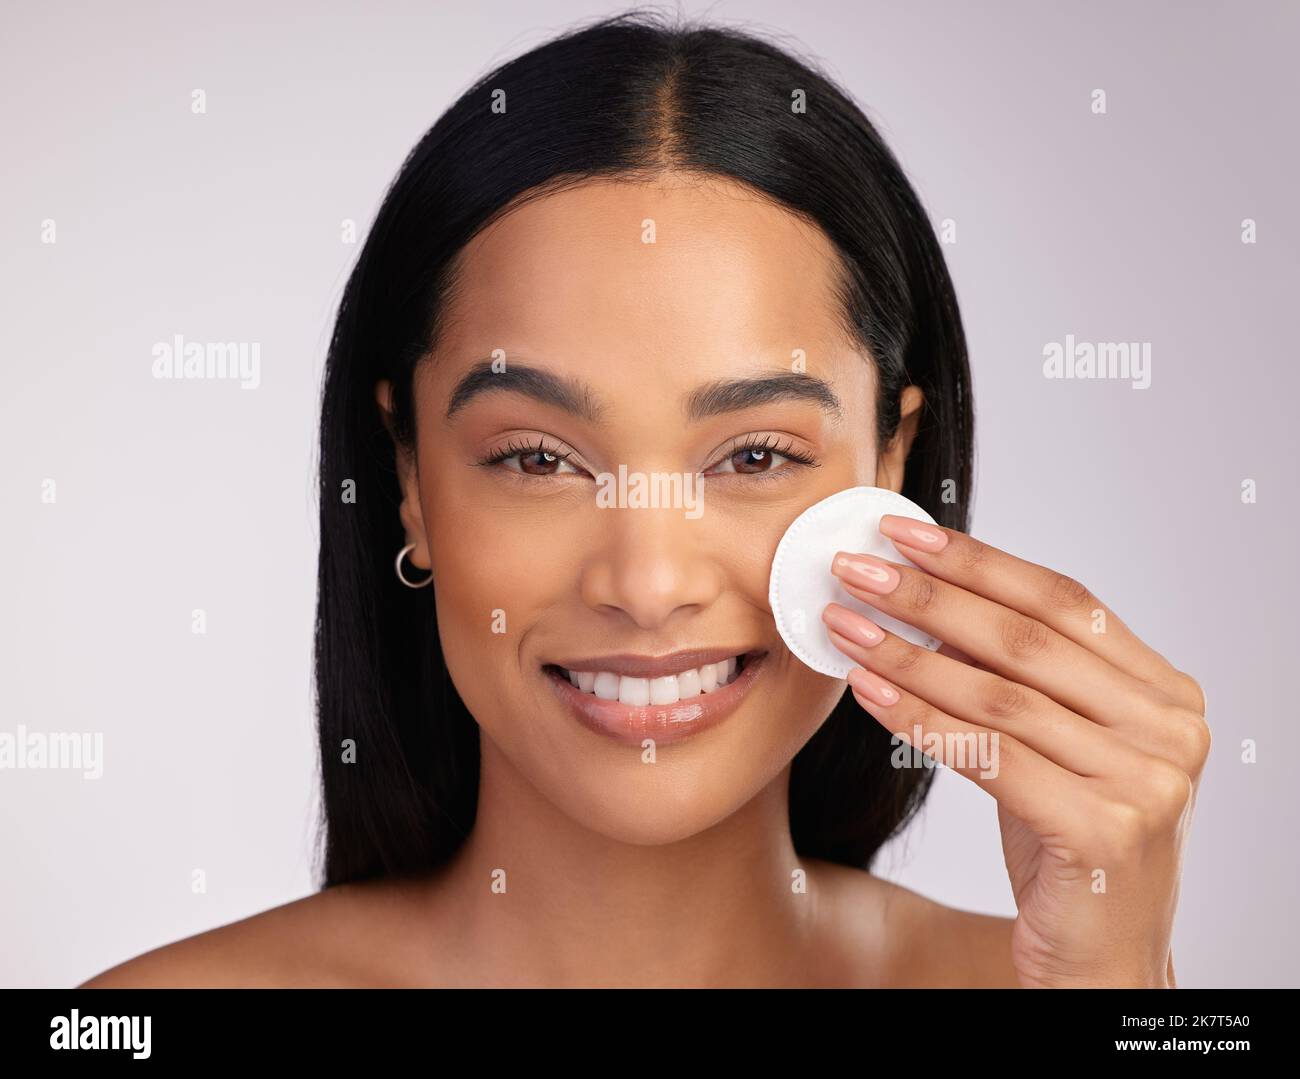 No clogged pores here. Cropped portrait of an attractive young woman exfoliating her face against a pink background. Stock Photo